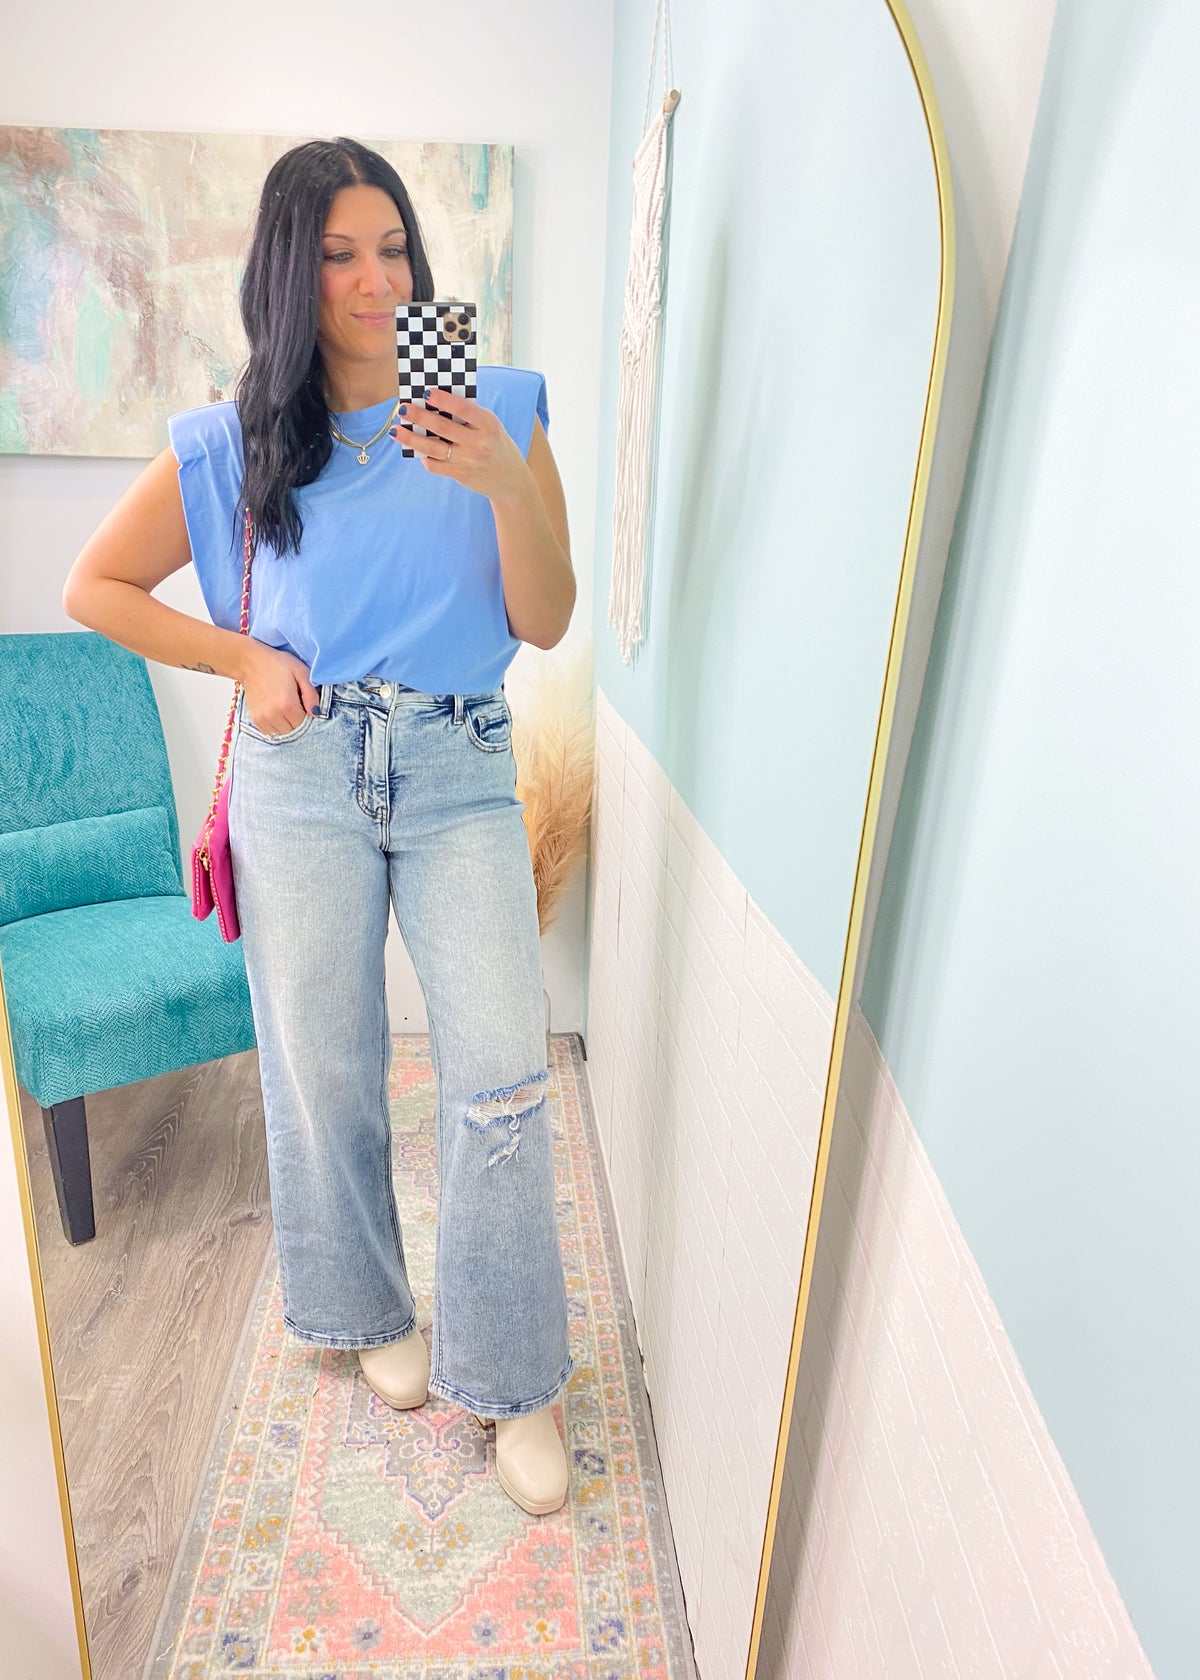 'Sky High' Baby Blue High Shoulder Tee-This padded high shoulder tee is the cutest addition to your tee shirt collection! A stand out chic look that you can wear on casual day dates or nights out. Wear tucked or untucked for different looks.&nbsp;<br>-Cali Moon Boutique, Plainville Connecticut